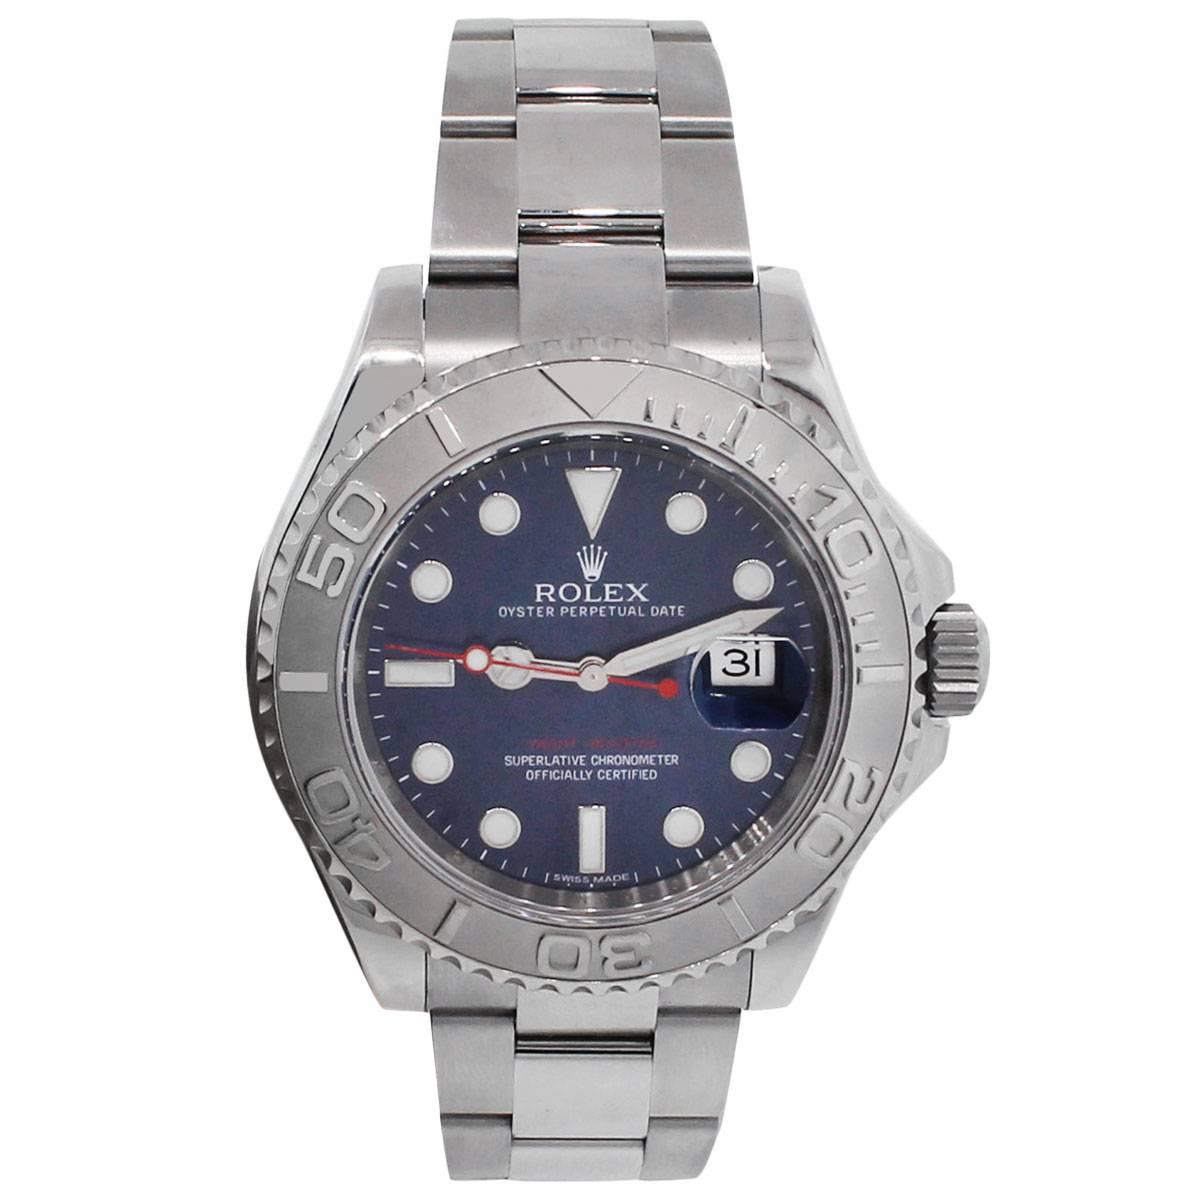 Brand: Rolex
MPN: Yachtmaster
Model: 116622
Case Material: Stainless steel
Case Diameter: 40mm
Crystal: Scratch resistant sapphire
Bezel: Platinum Special Time-Lapse Bidirectional Rotating Bezel.
Dial: Blue dial with the luminescent dot and triangle